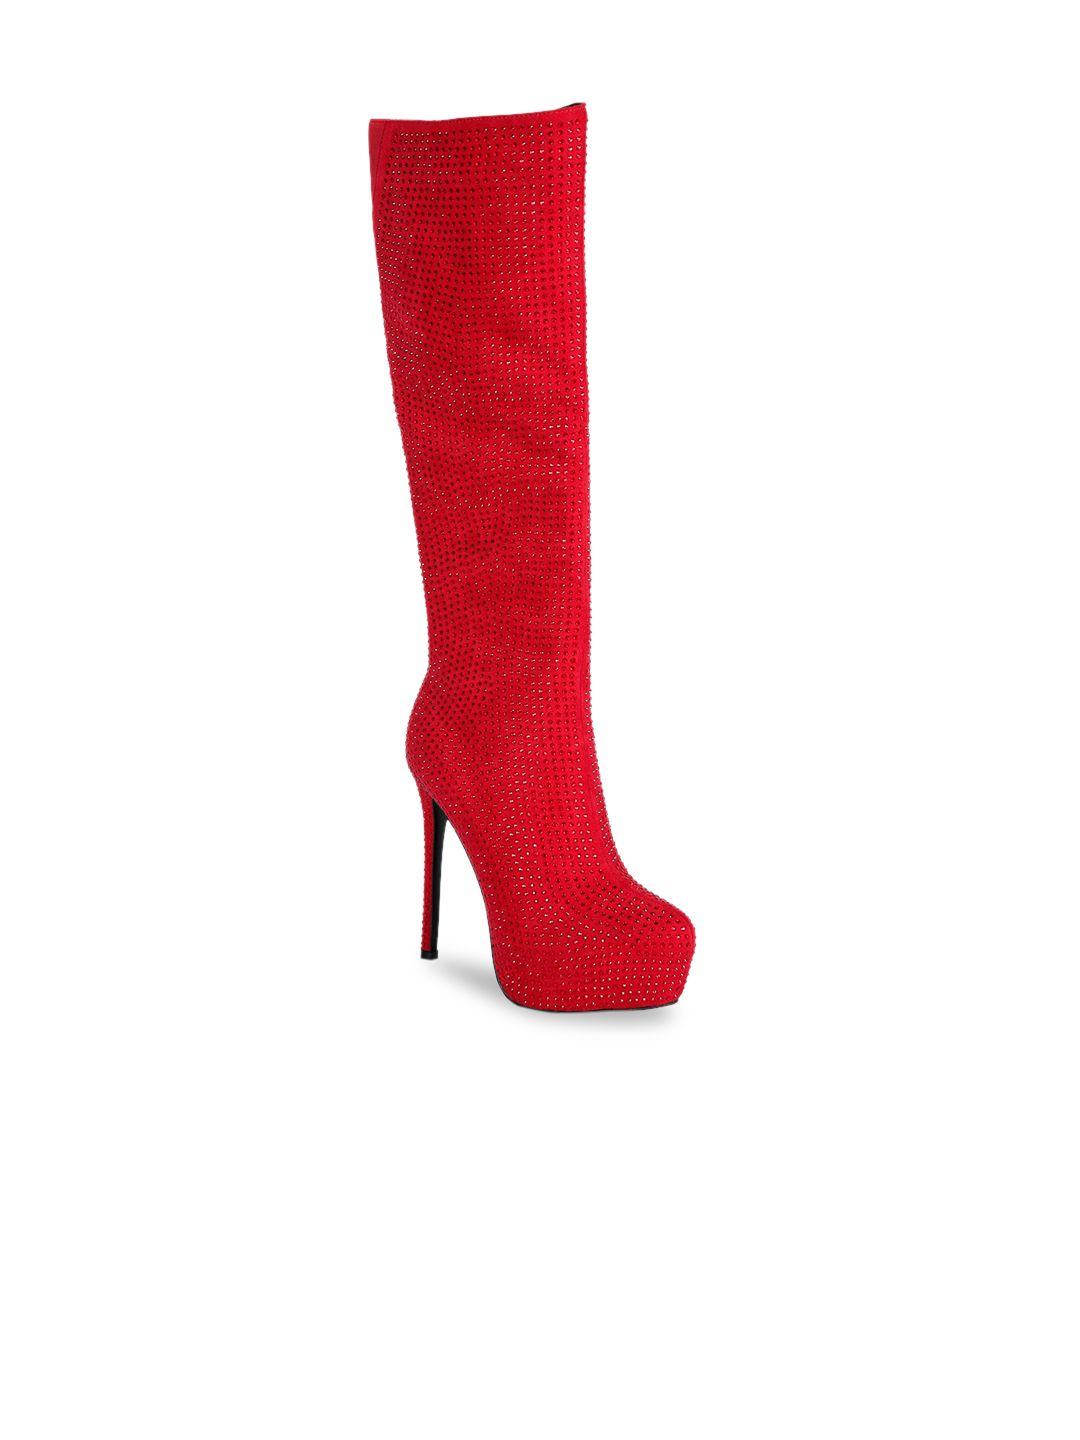 london rag women red  embellished stiletto chunky boots